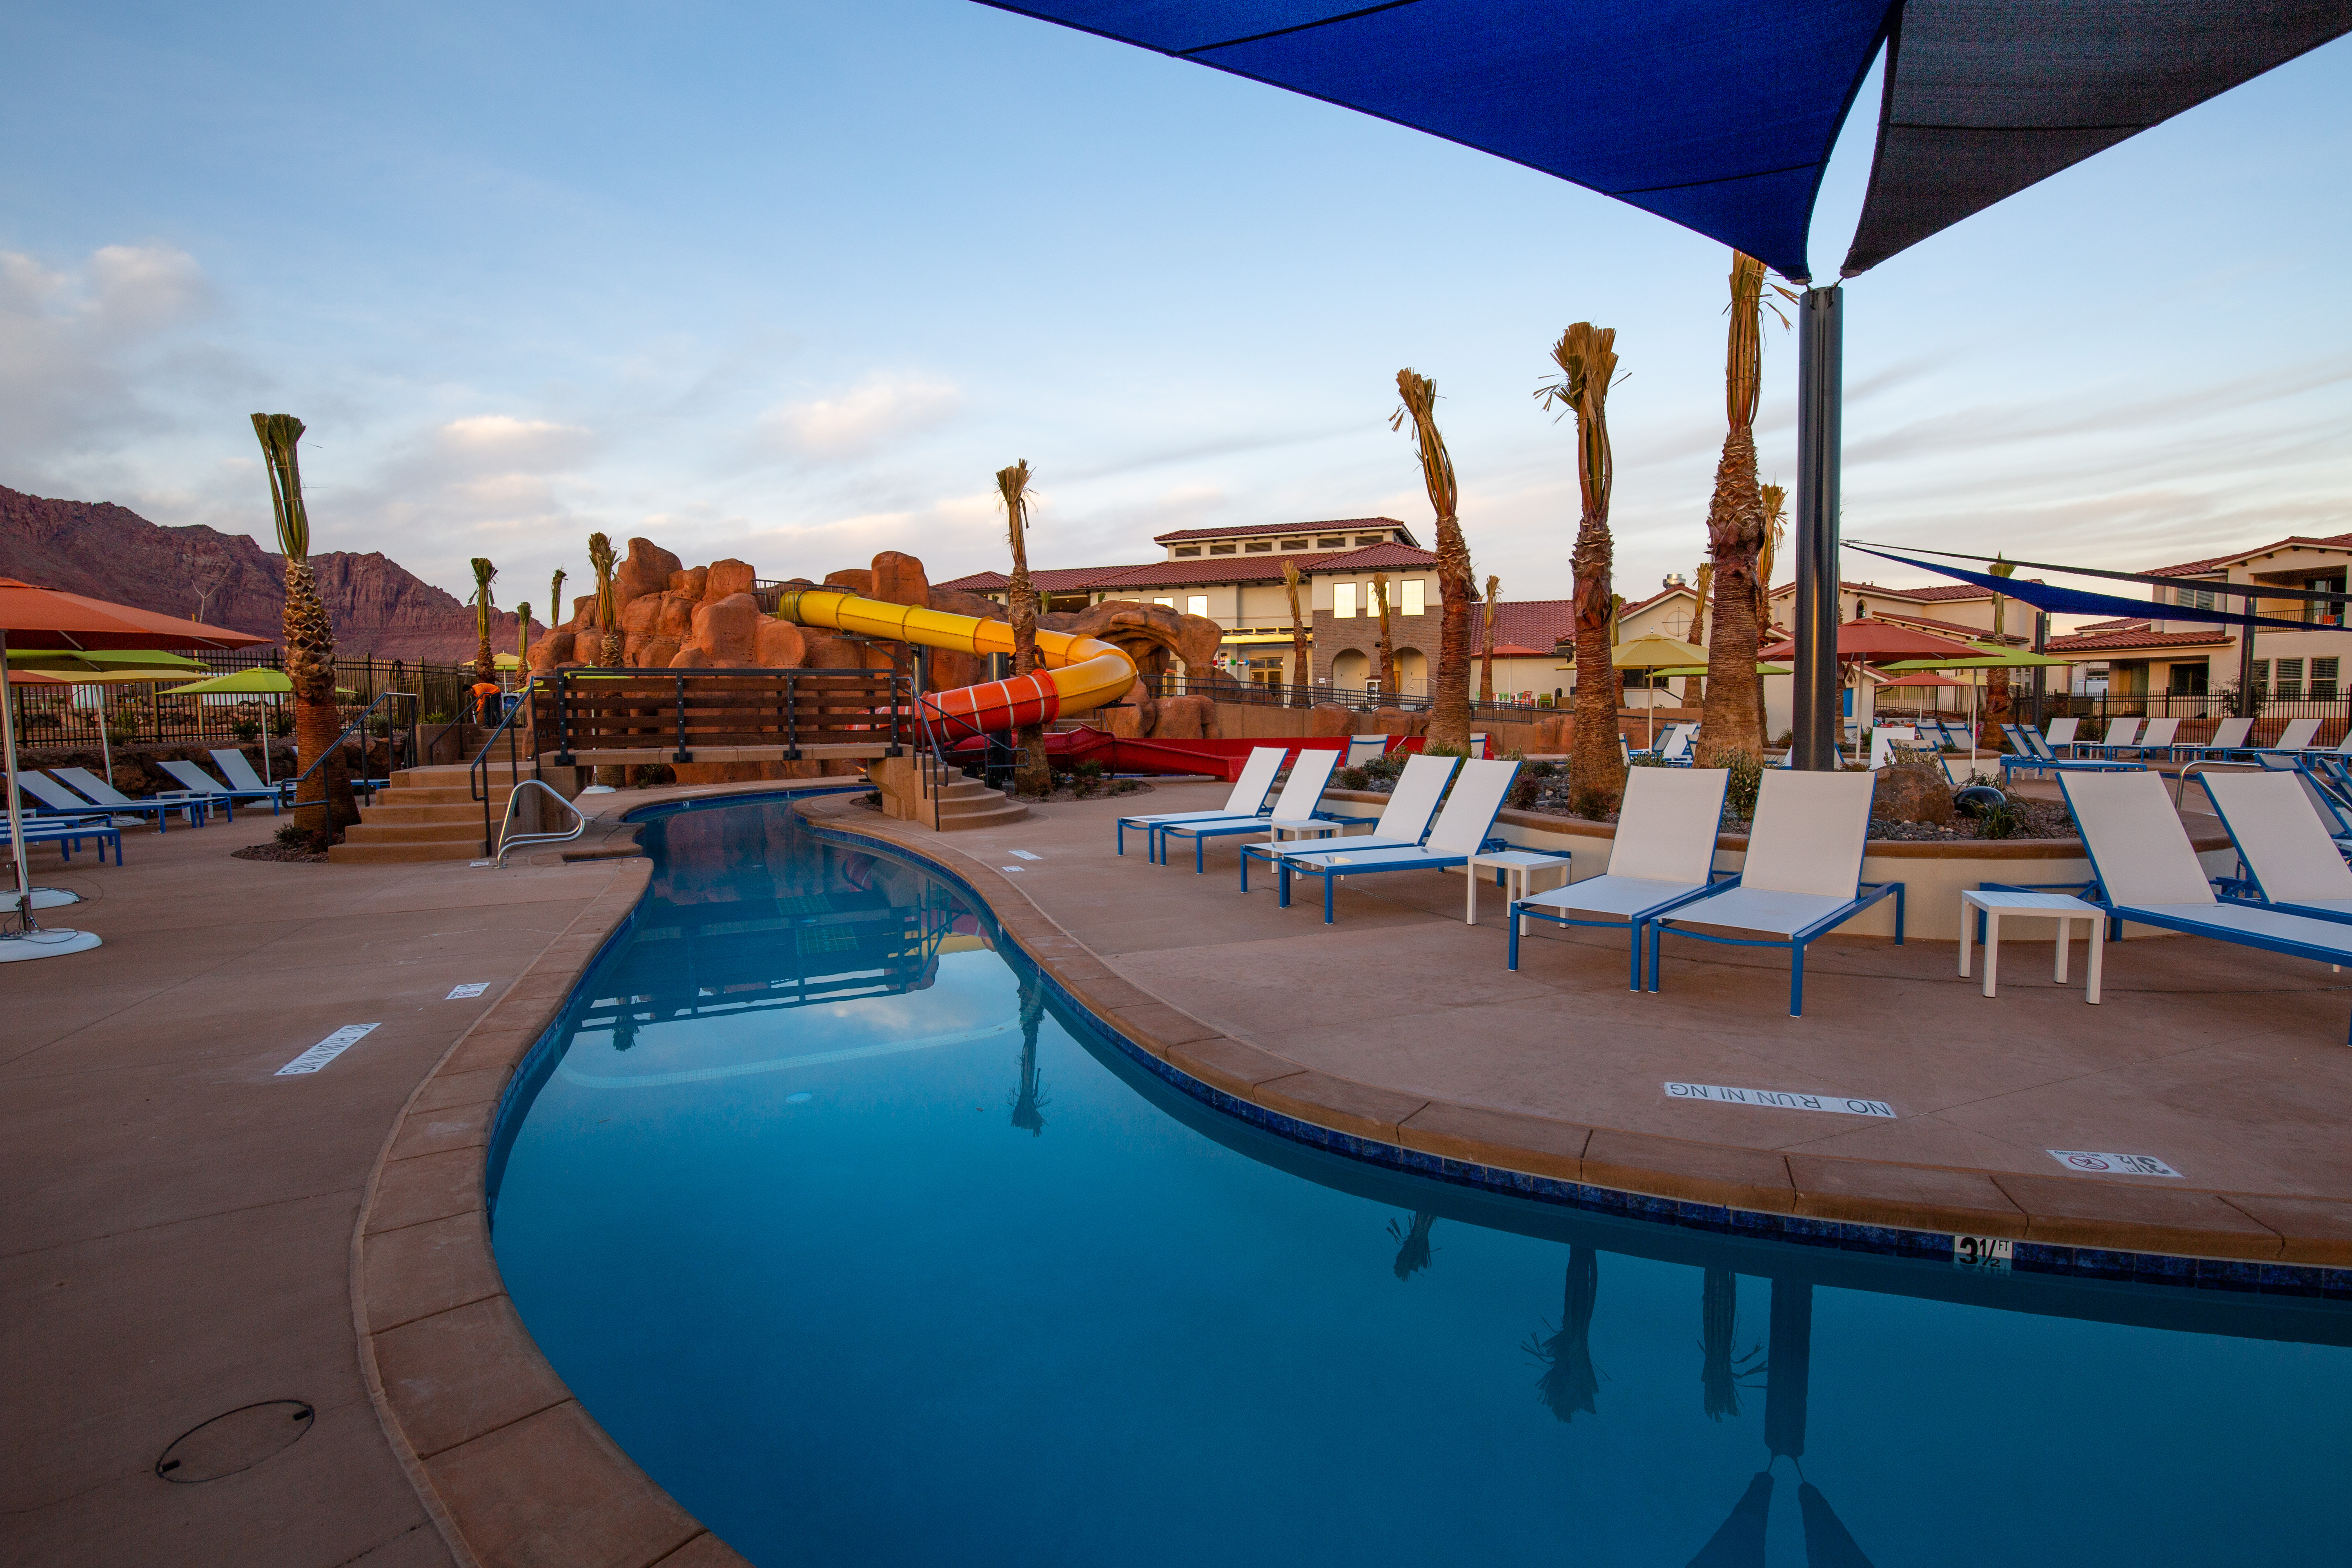 Enjoy access to the premier resort amenities including a lazy river and water slide